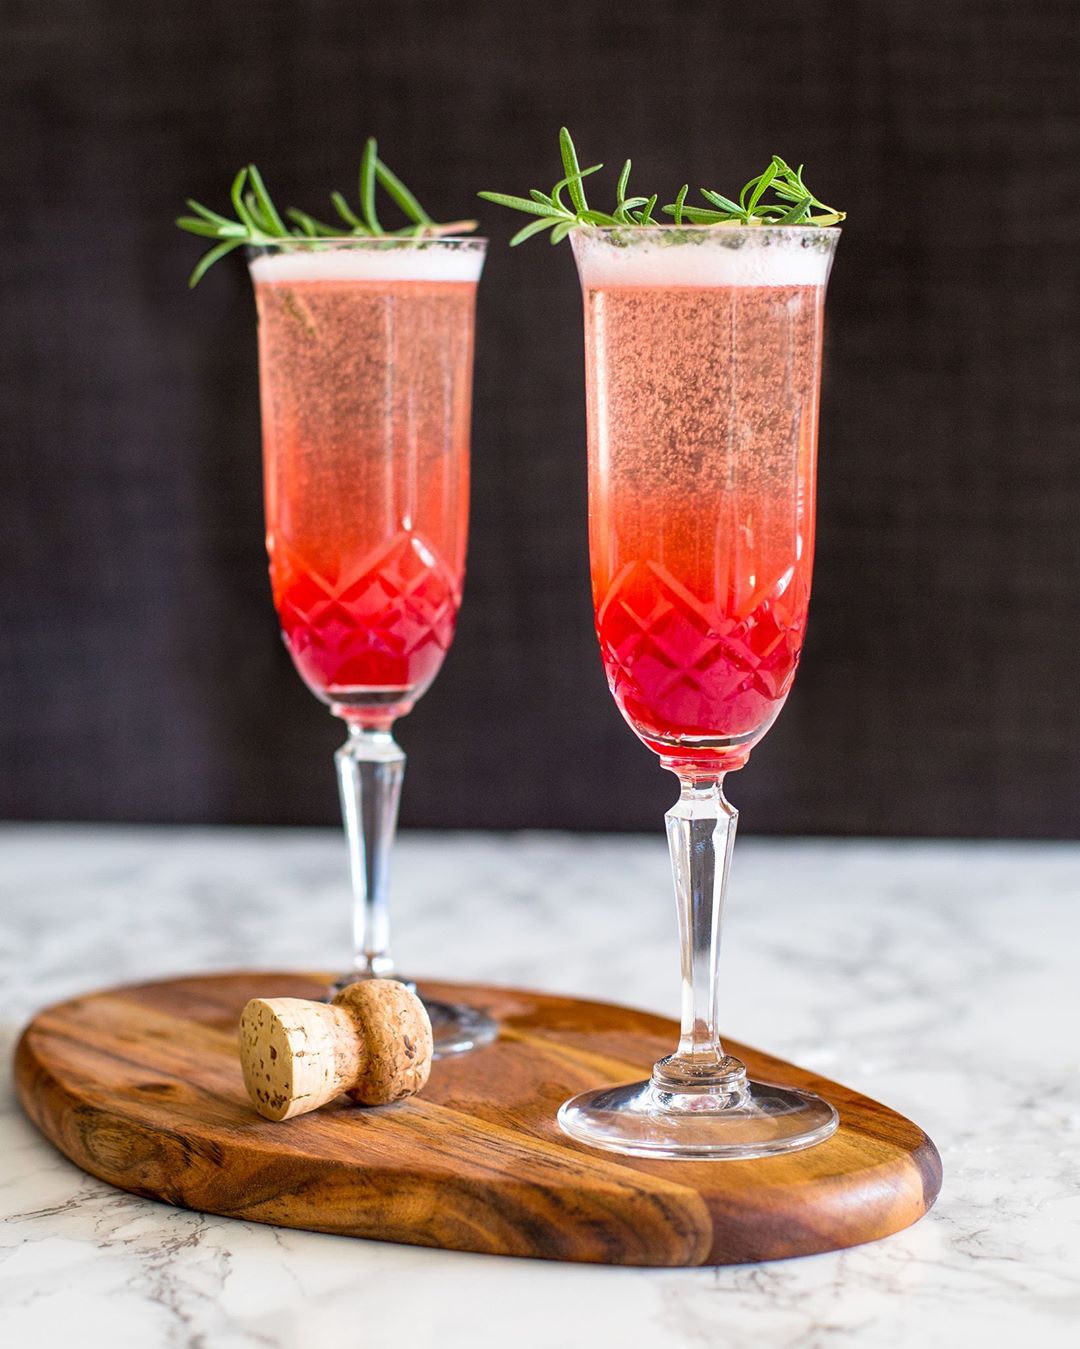 Cranberry Prosecco Cocktail recipe by Jason Plummer The